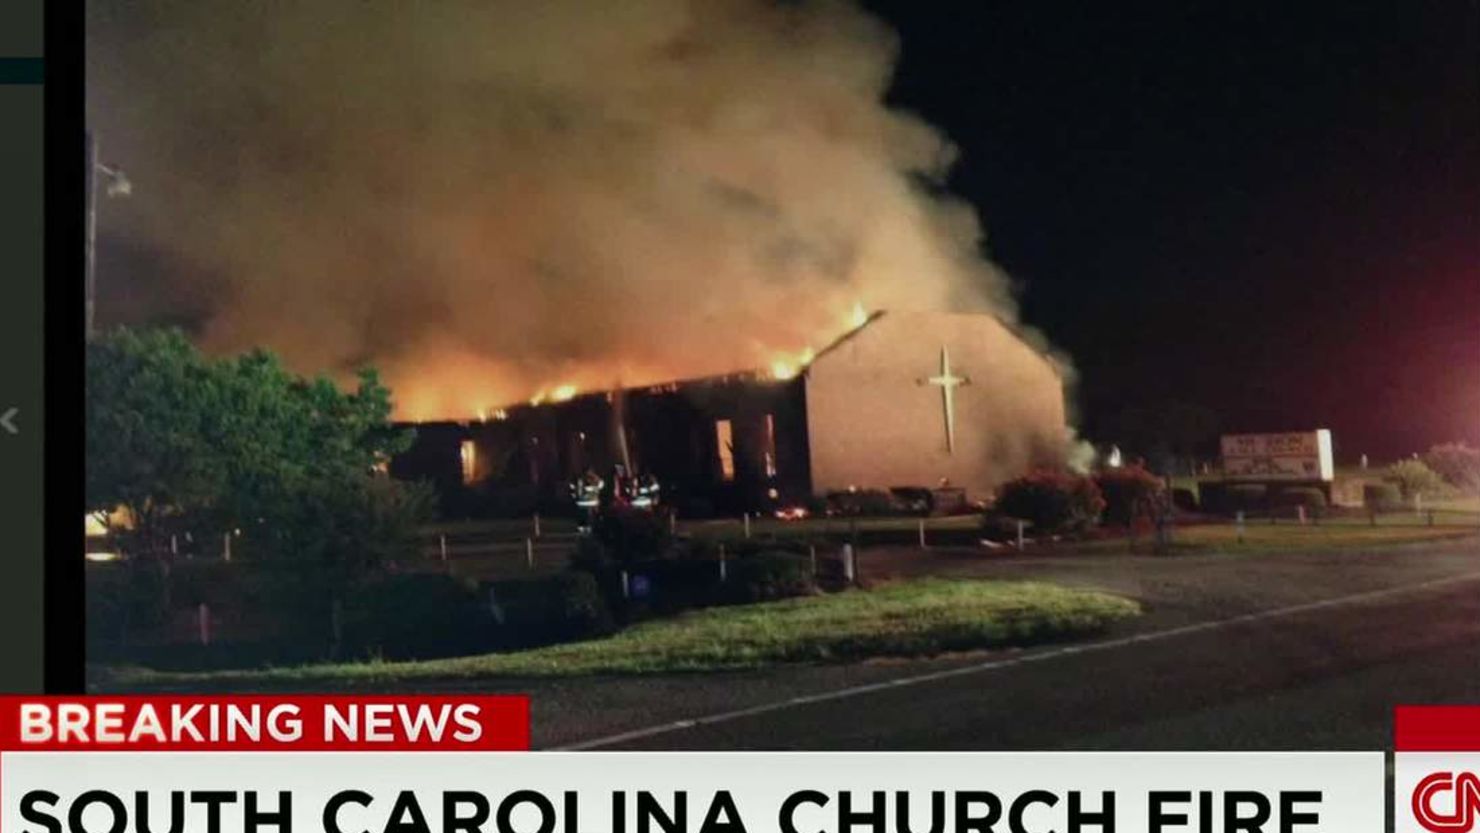 A storm was hitting Greeleyville when the fire at Mount Zion AME Church started Tuesday night.